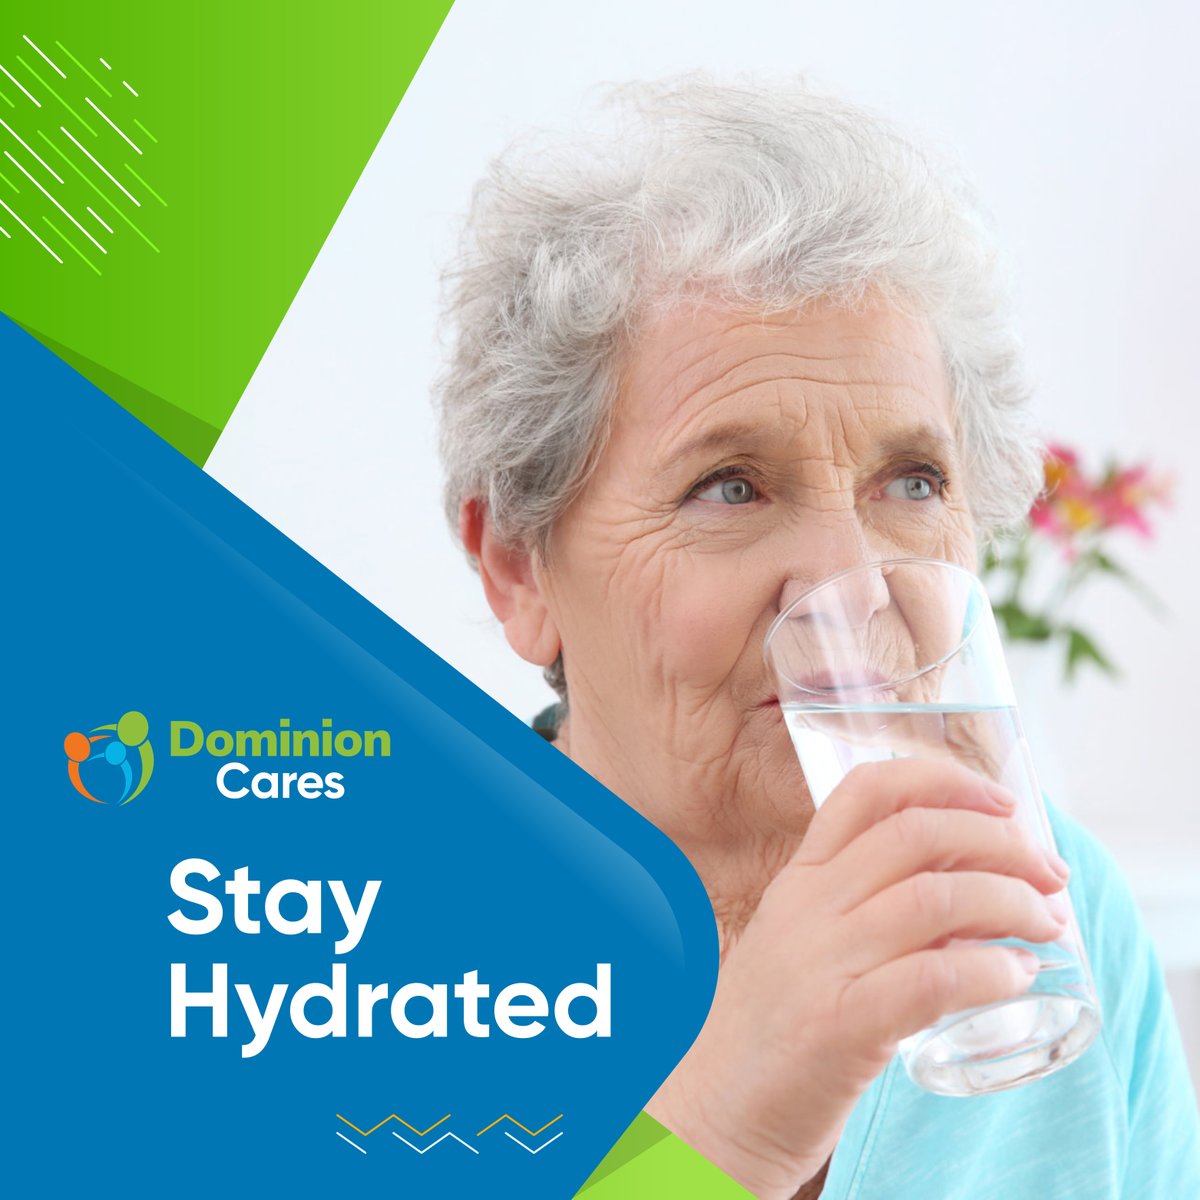 Minnesota has a cold climate. And if you’re not used to the cold weather, moving to Minnesota can be very challenging. Staying hydrated at all times is...

Read more:
https://t.co/I1YAU7I9sy

#HutchinsonMN #StayHydrated #HomeHealthCare https://t.co/PZHhHYWGFr